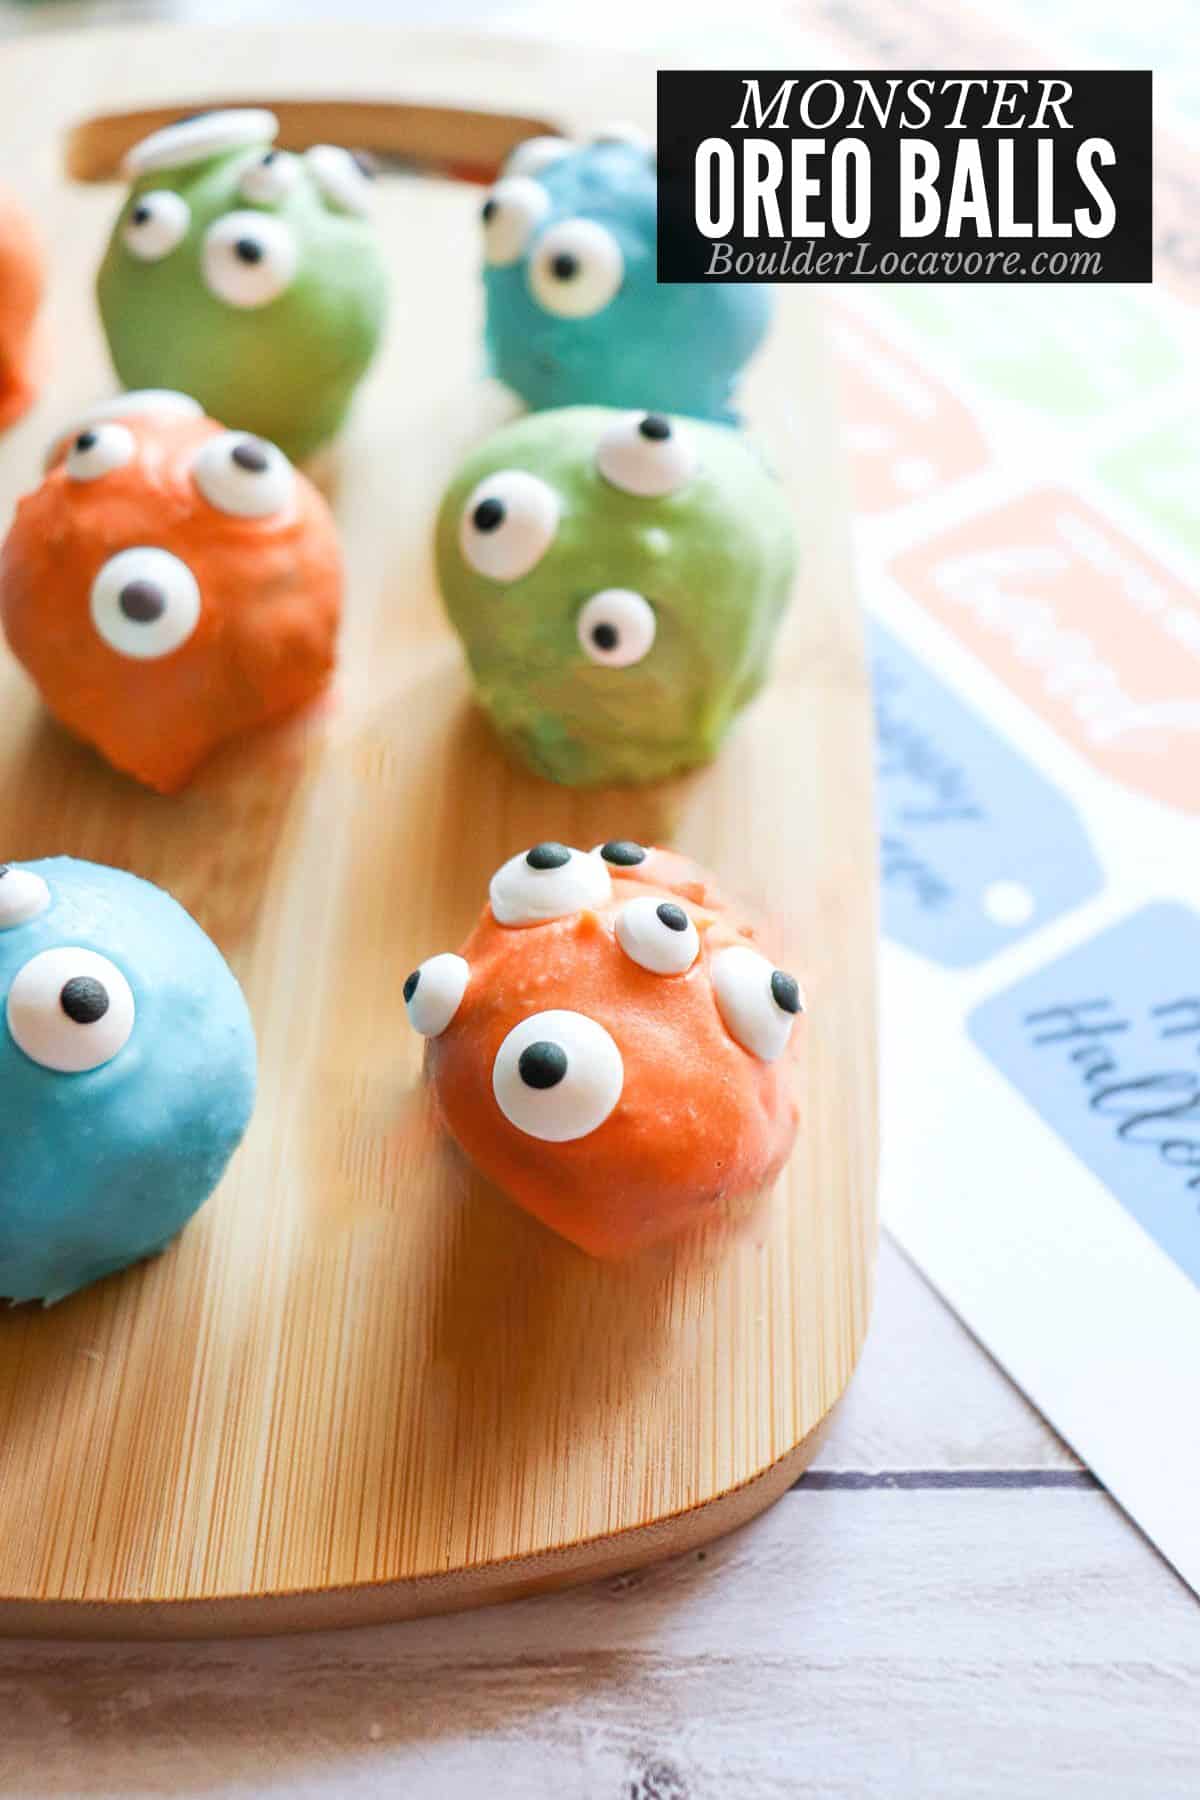 monster oreo balls with colorful coatings.